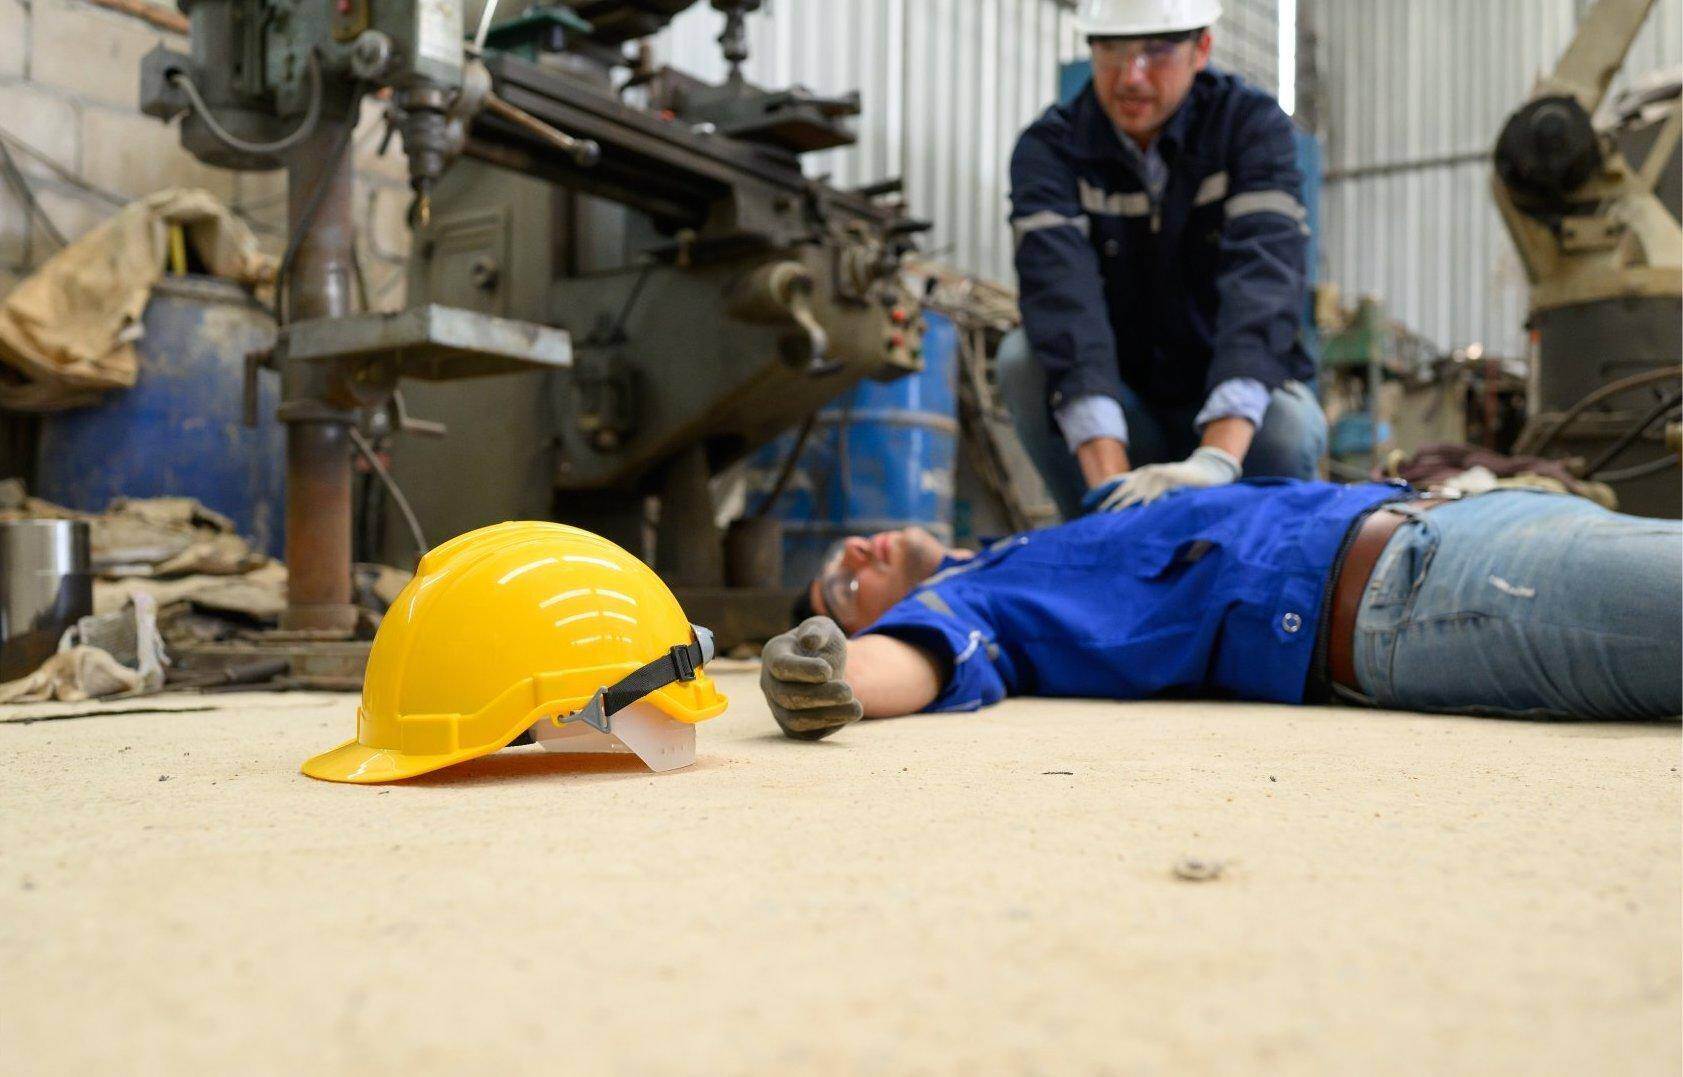 An unconscious man who has been injured on the job who will file for workers compensation in Calhoun, Georgia